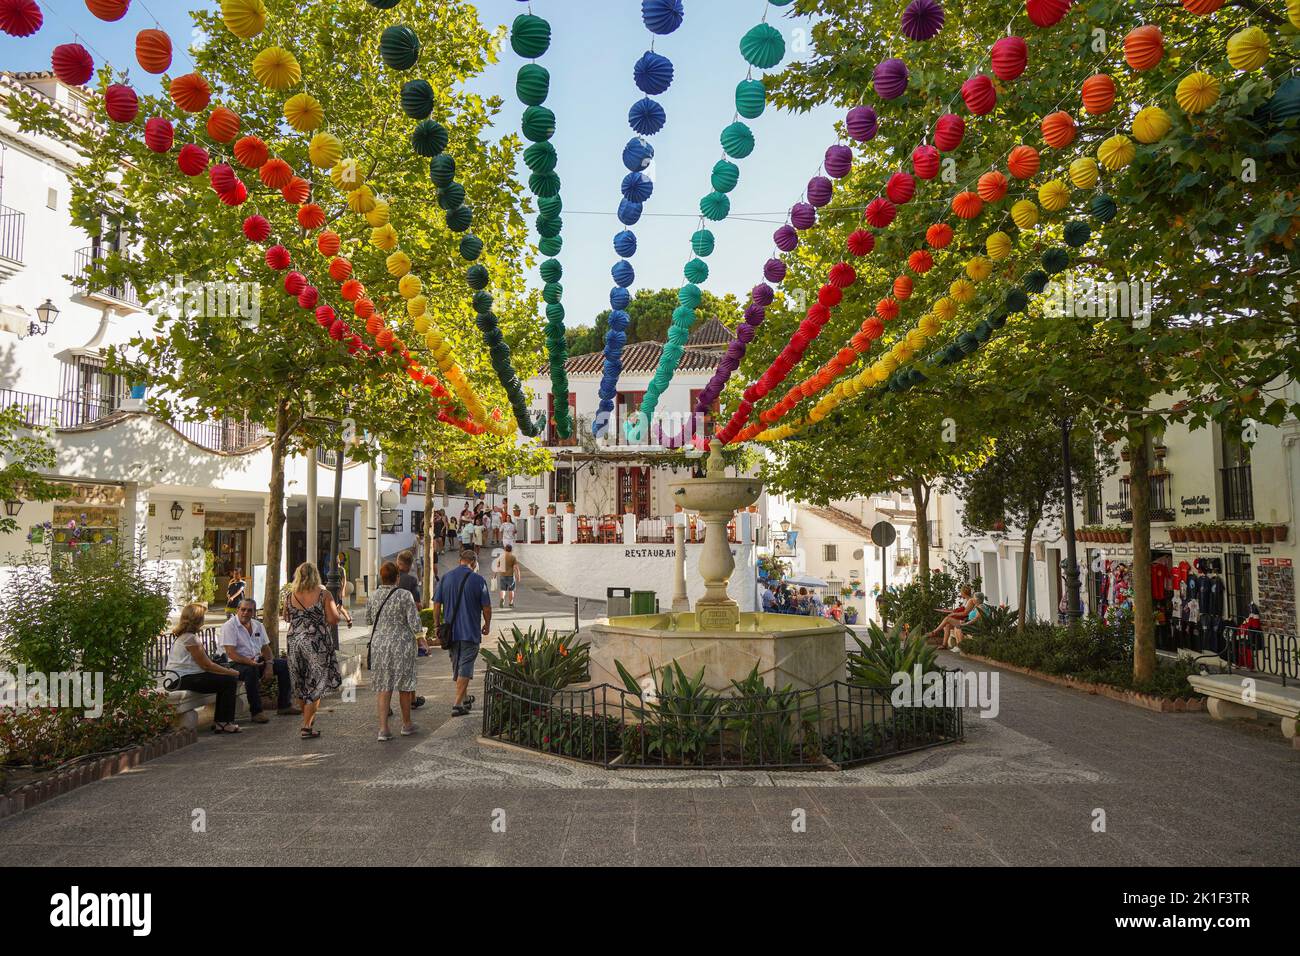 Decorated white washed village of Mijas pueblo, during festivities, Andalusia, Malaga province, Costa del sol, Spain Stock Photo